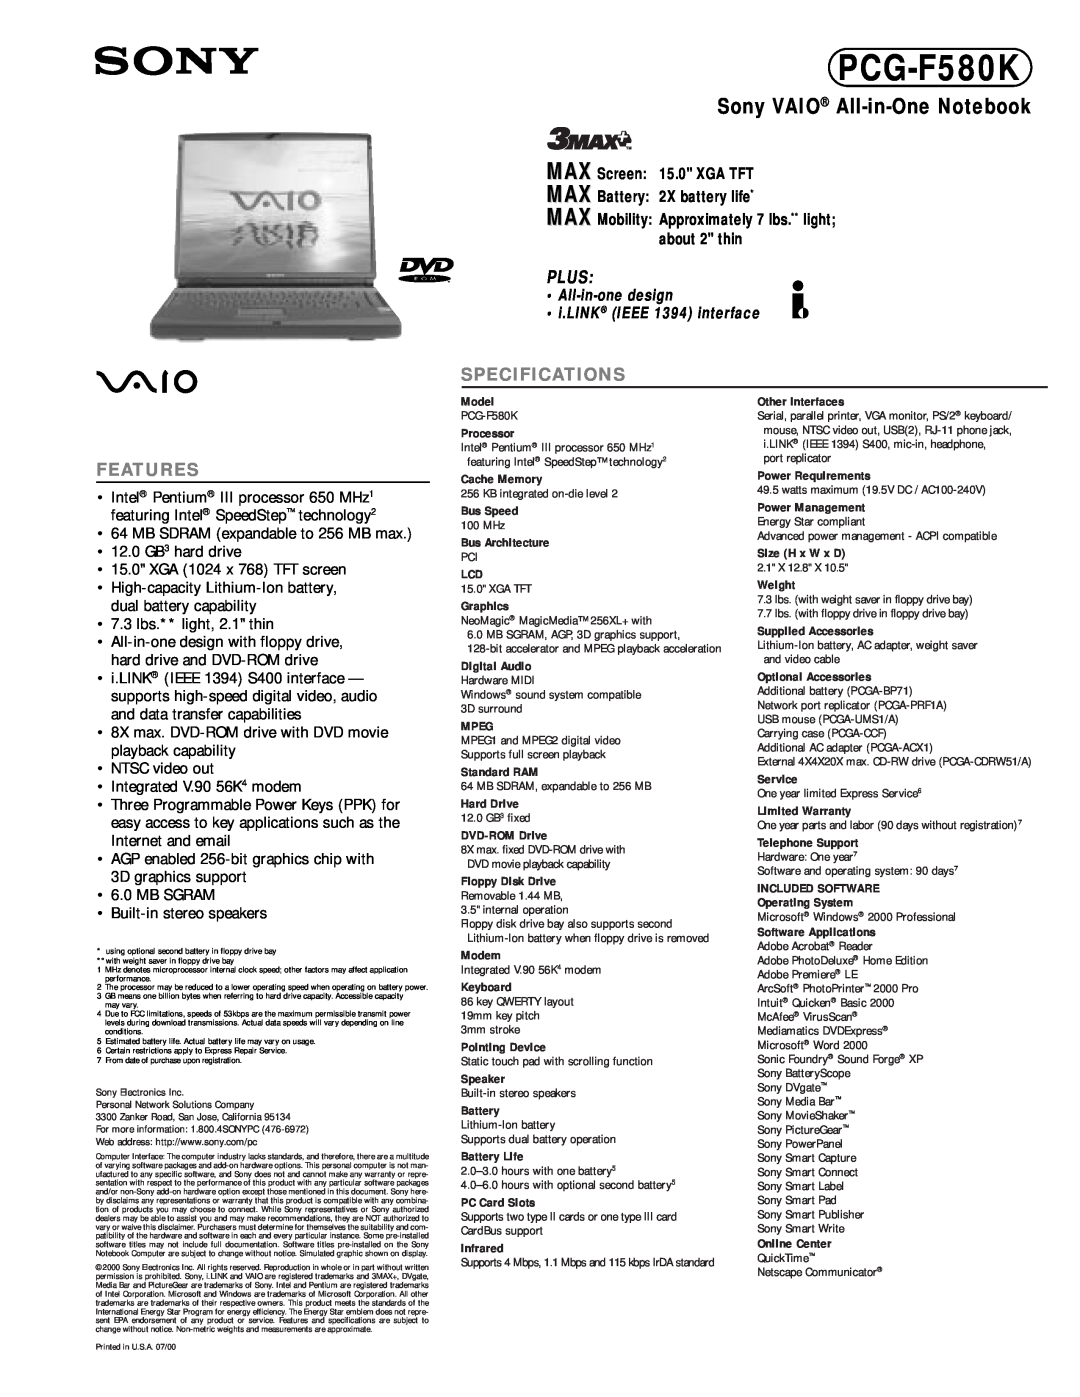 Sony PCG-F580K specifications Sony VAIO All-in-One Notebook, Features, Plus, Specifications 